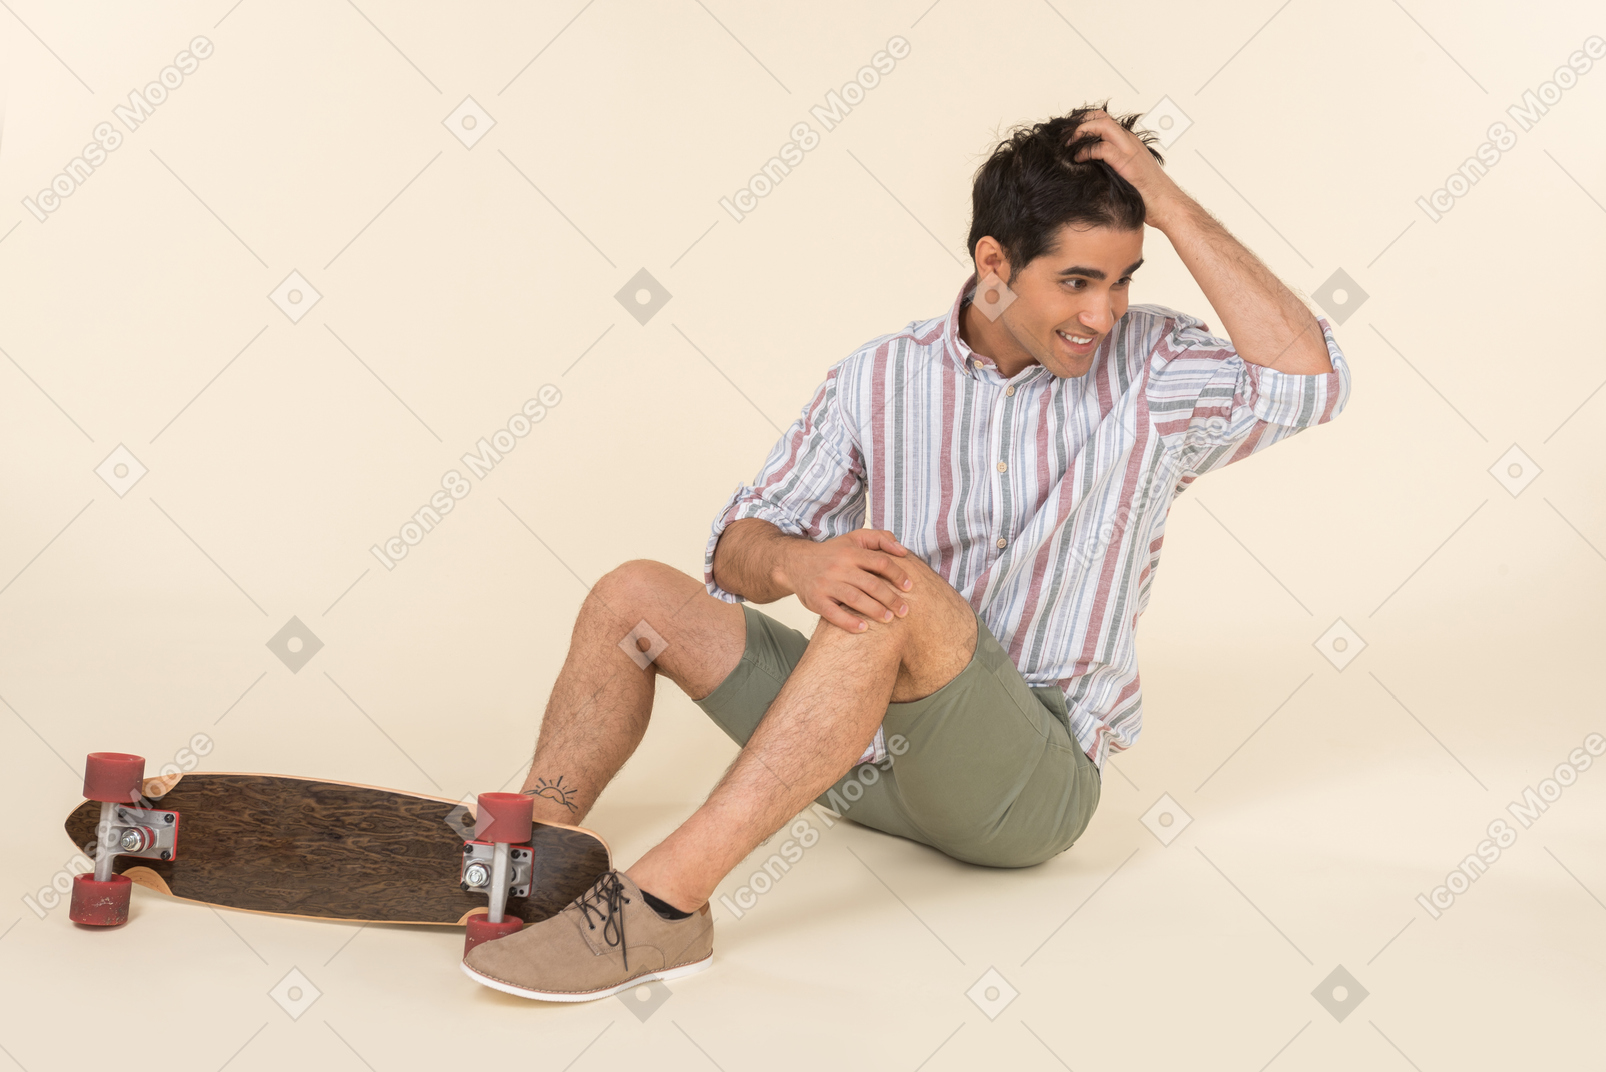 Young caucasian guy adjusting hair and sitting near skate